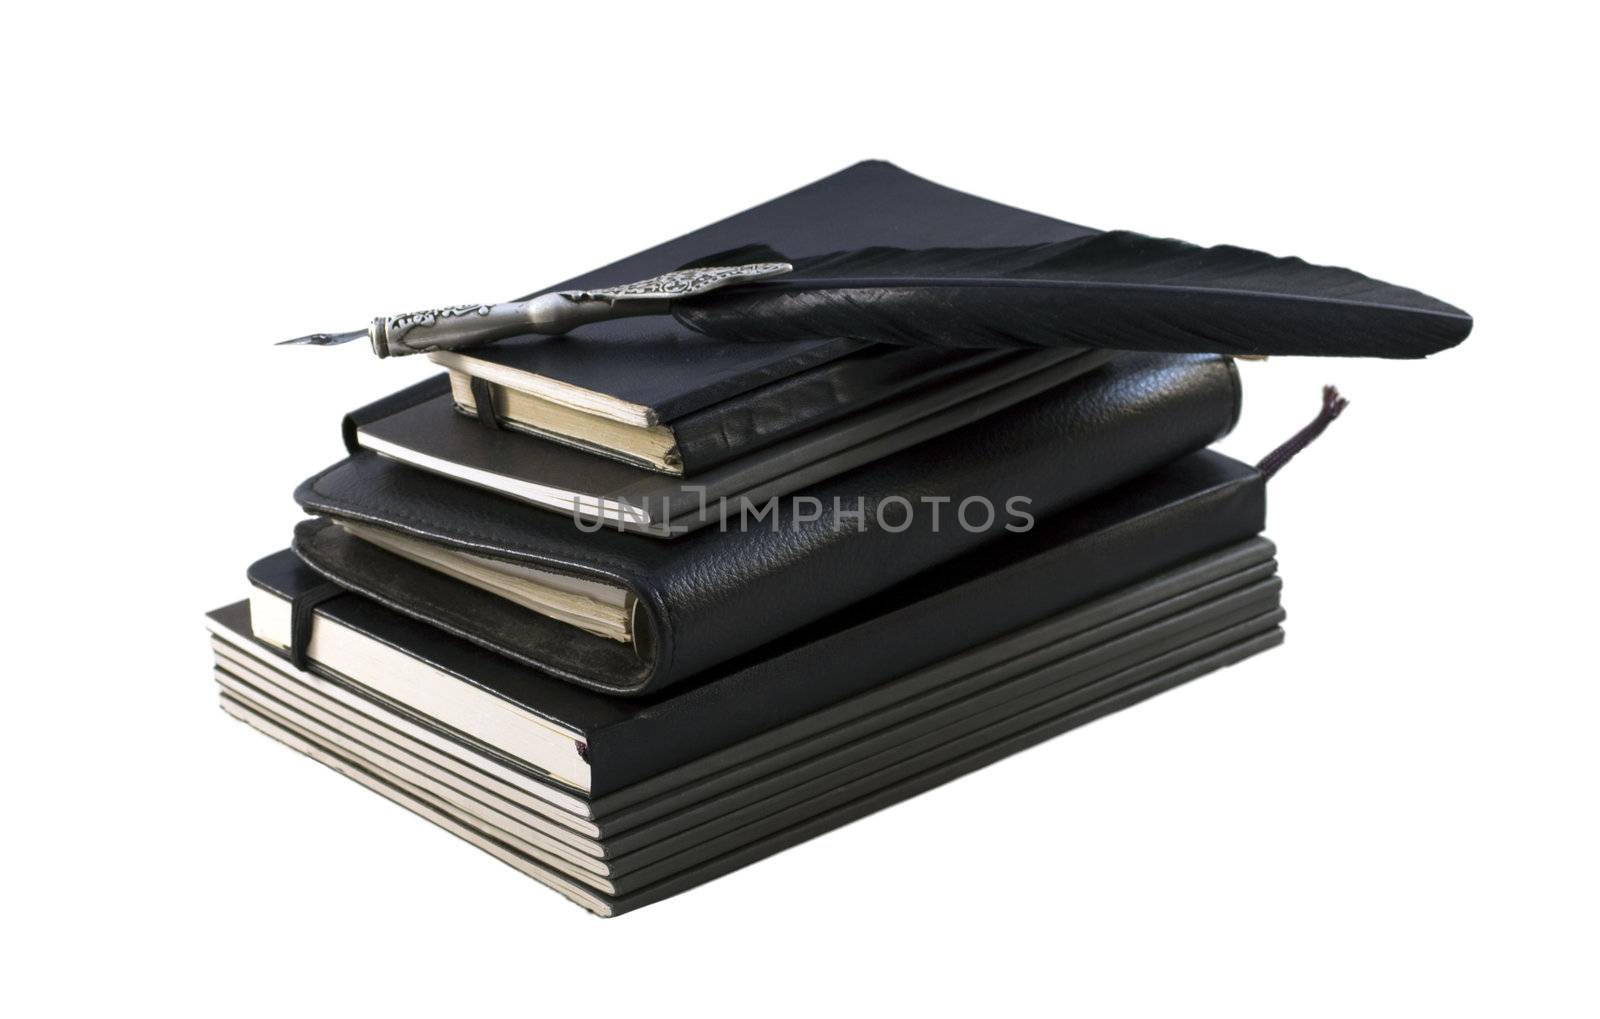 A pile of notebooks